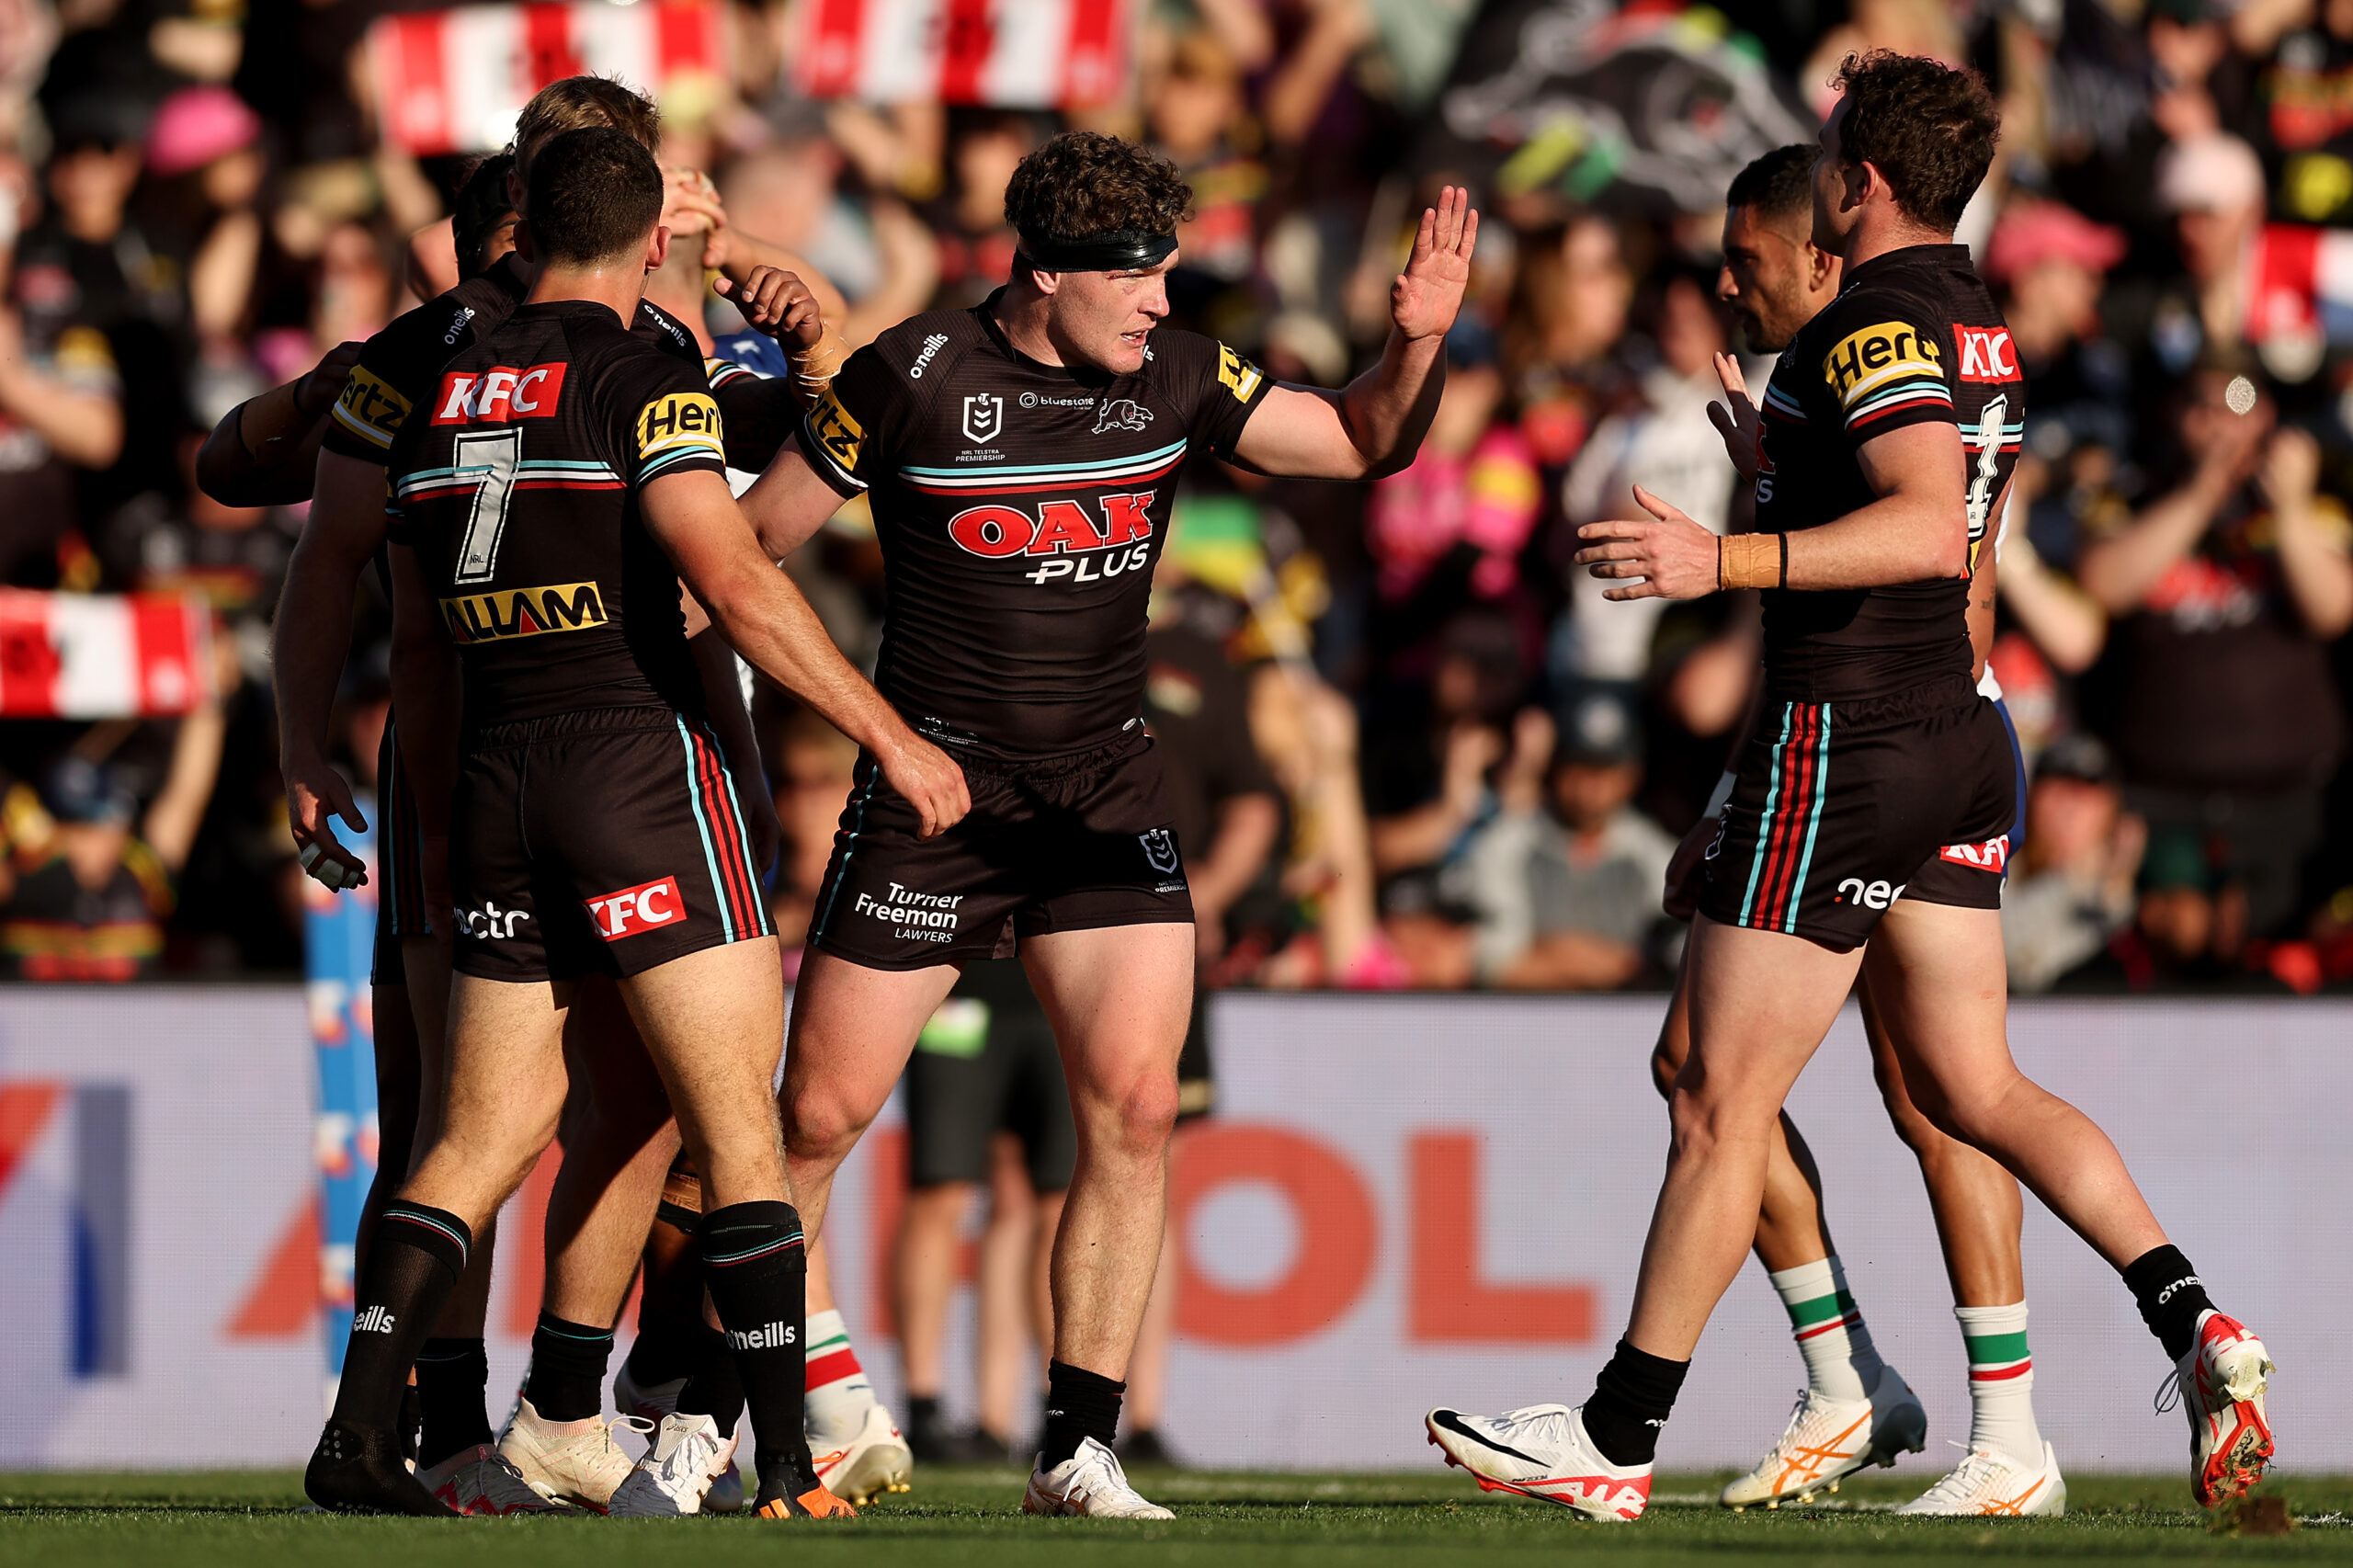 NRL grand final live stream guide How to watch Penrith Panthers vs Brisbane Broncos online or on TV, teams, start time, venue - NRL News